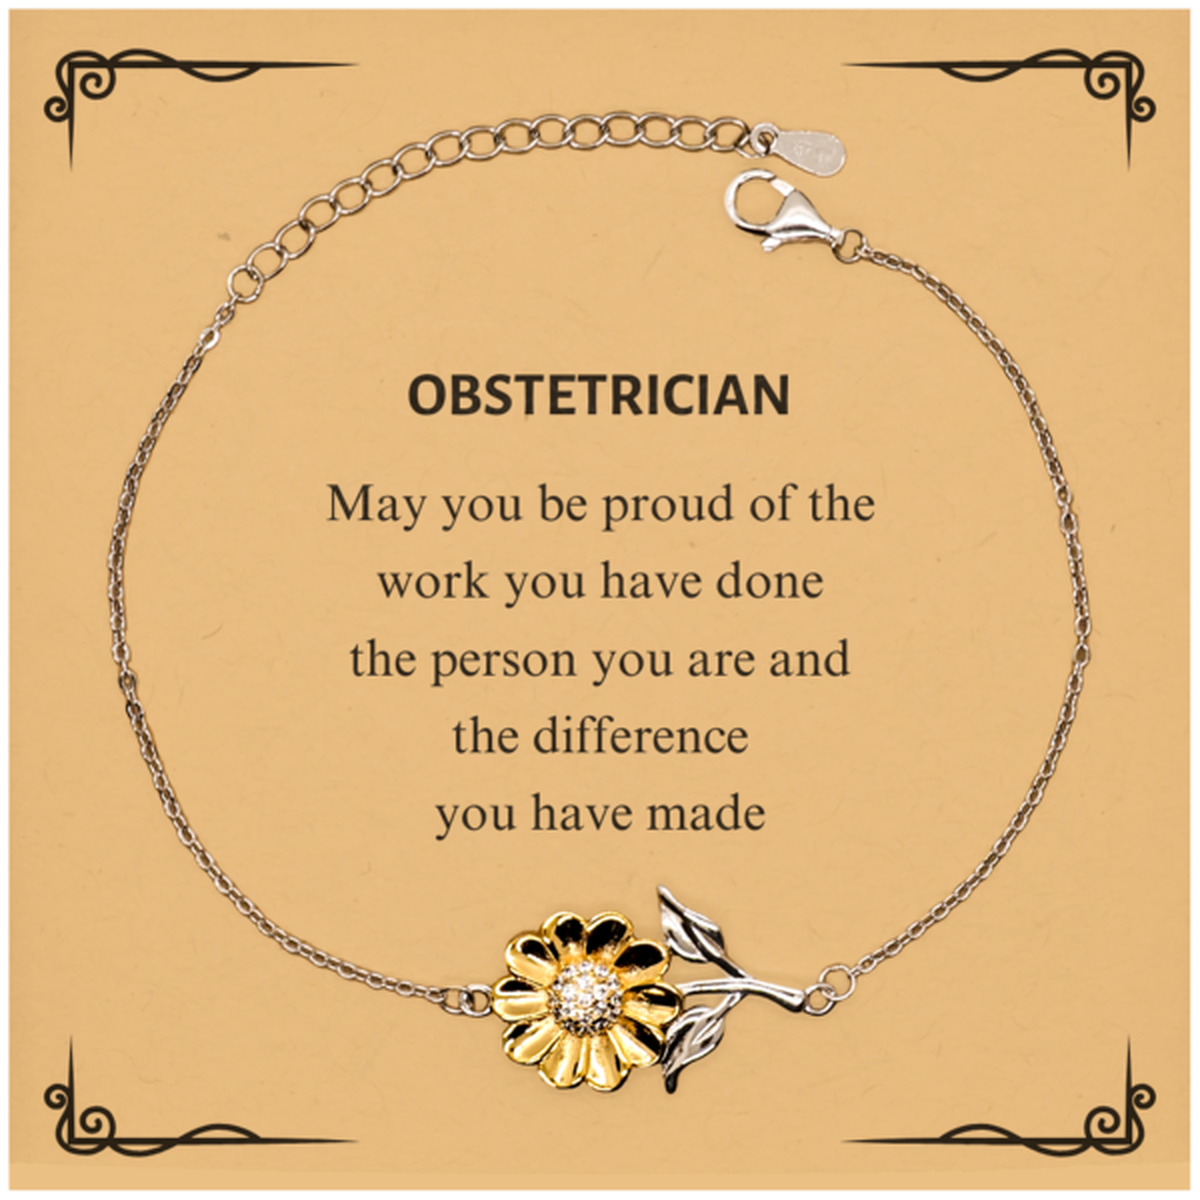 Obstetrician May you be proud of the work you have done, Retirement Obstetrician Sunflower Bracelet for Colleague Appreciation Gifts Amazing for Obstetrician